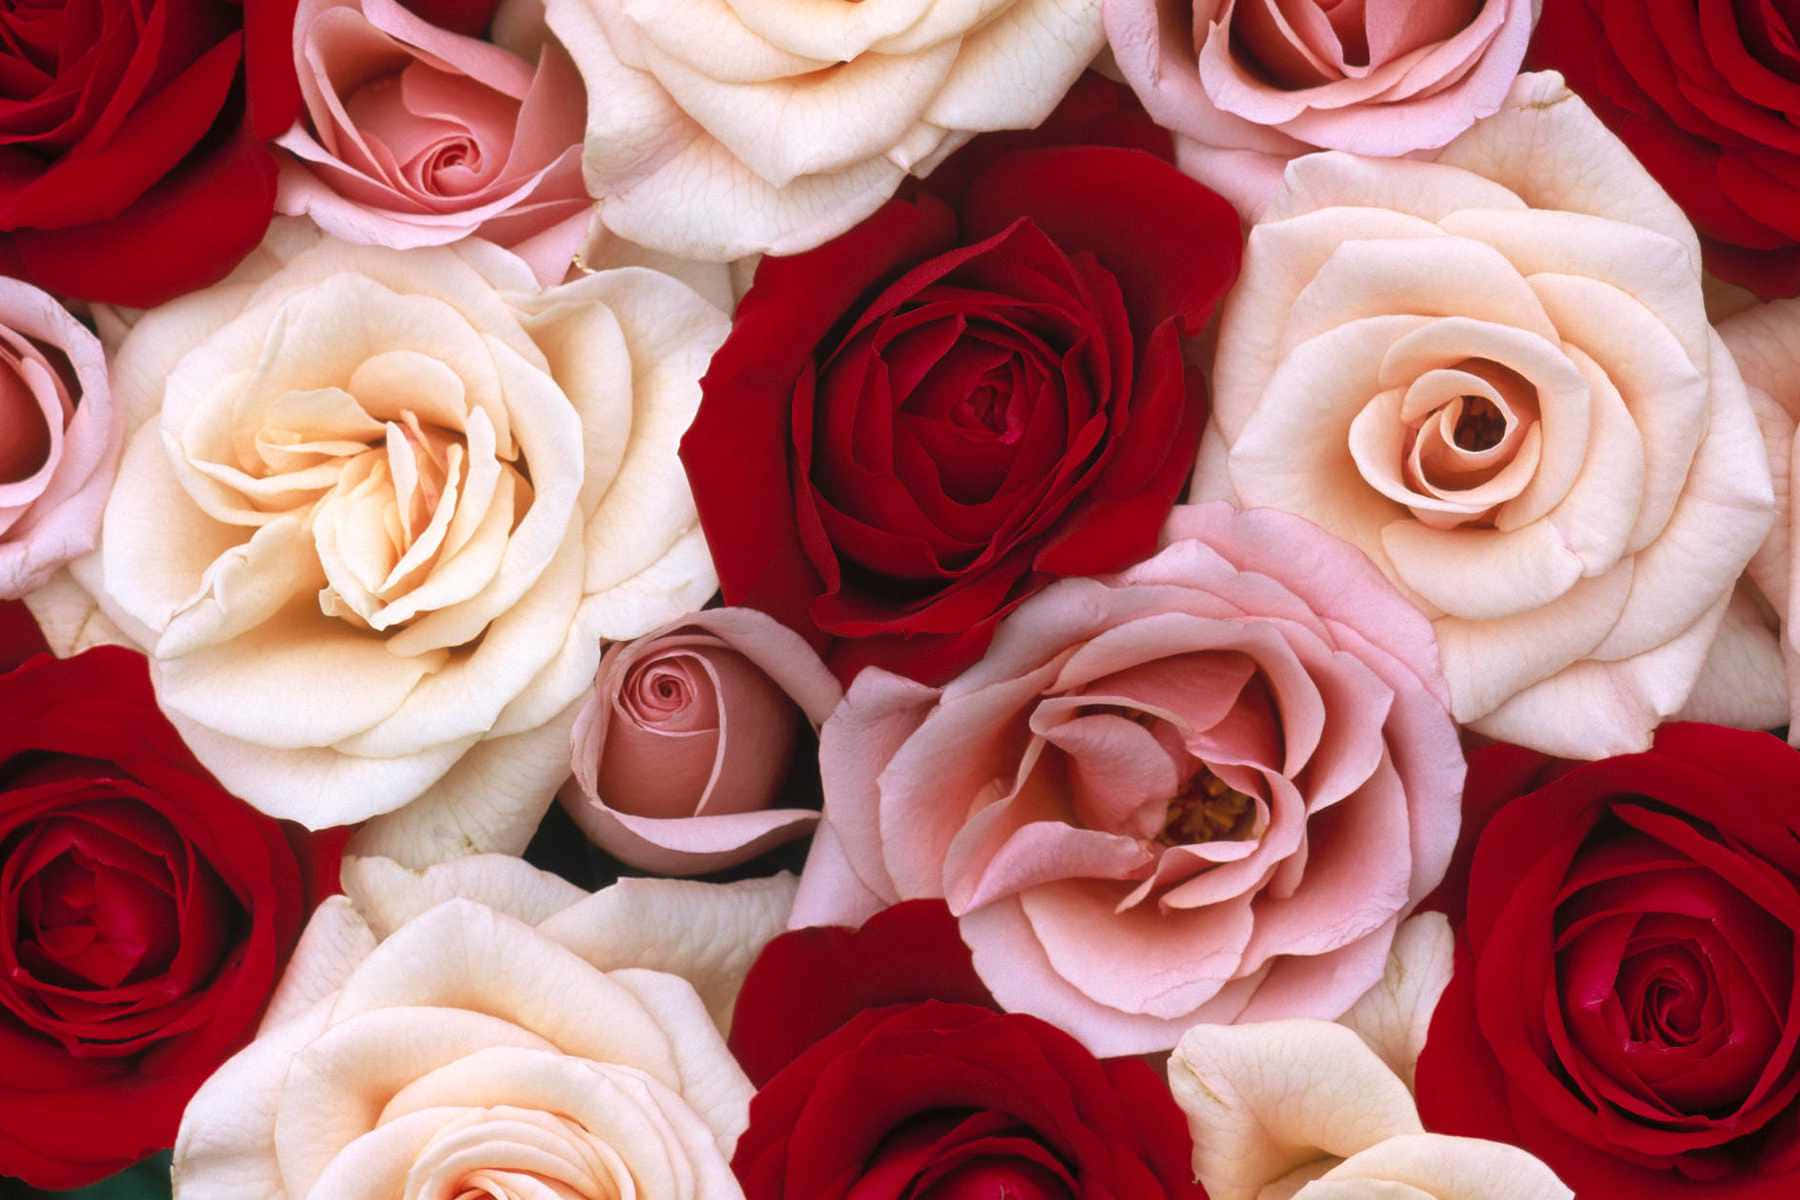 A Close Up Of Many Red And White Roses